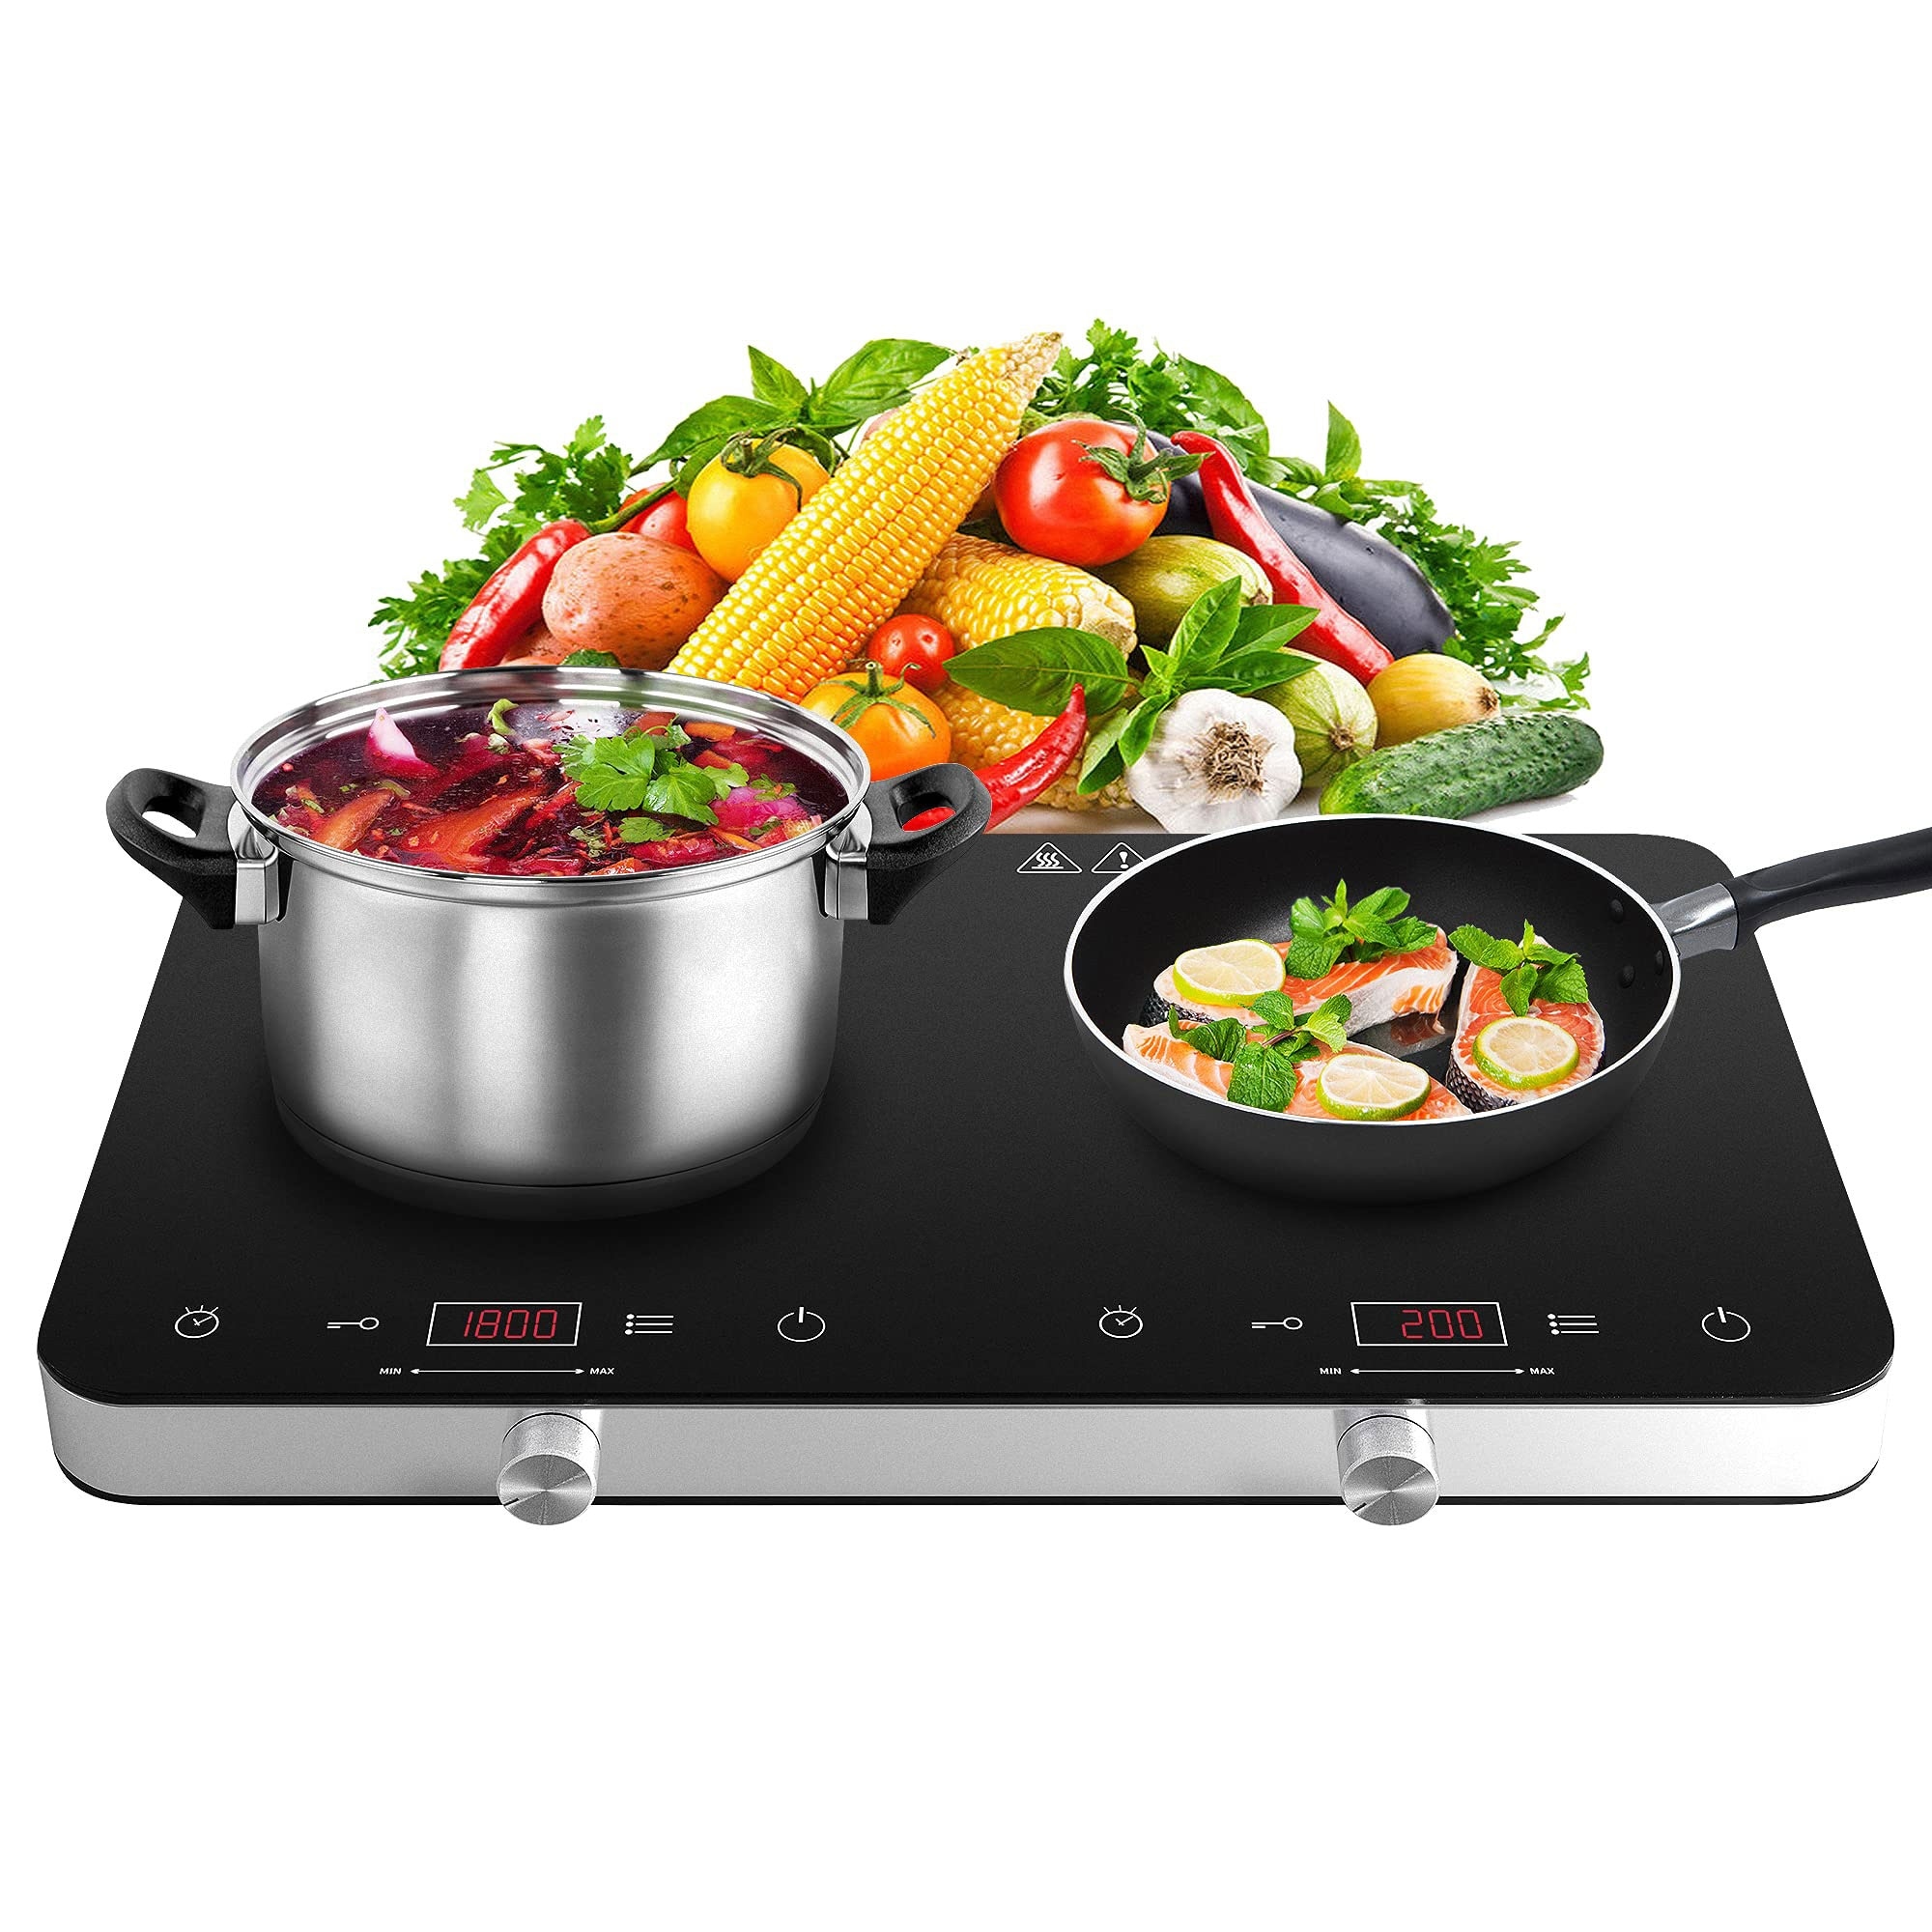 https://ak1.ostkcdn.com/images/products/is/images/direct/1efccd043fecd5b530b7242d11da5654bdd0aee7/COOKTRON-1800W-120V-Portable-Double-Burner-Electric-Induction-Cooktop-w-Knobs.jpg